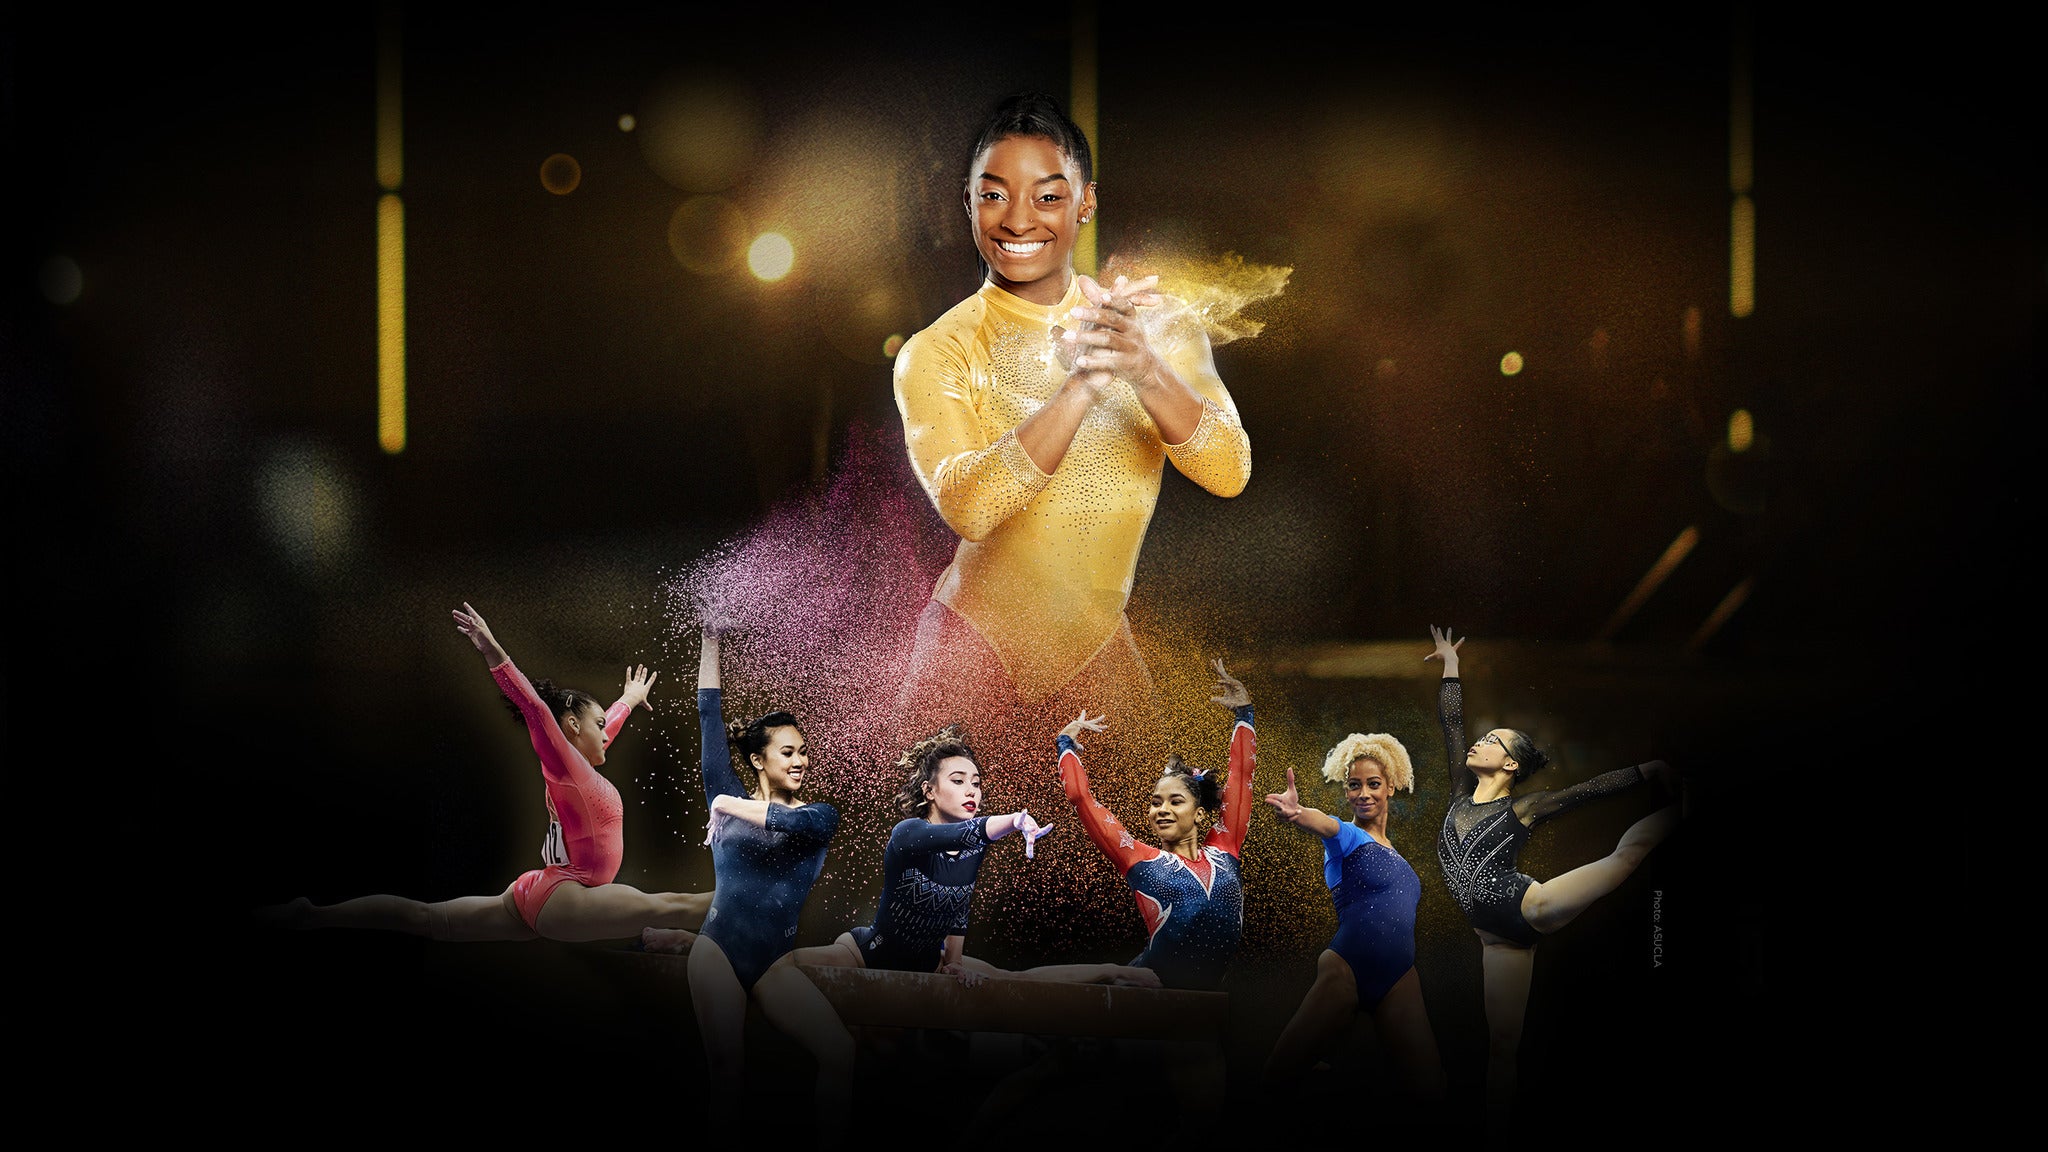 G.O.A.T. Gold Over America Tour Starring Simone Biles in Rosemont promo photo for Ticketmaster presale offer code